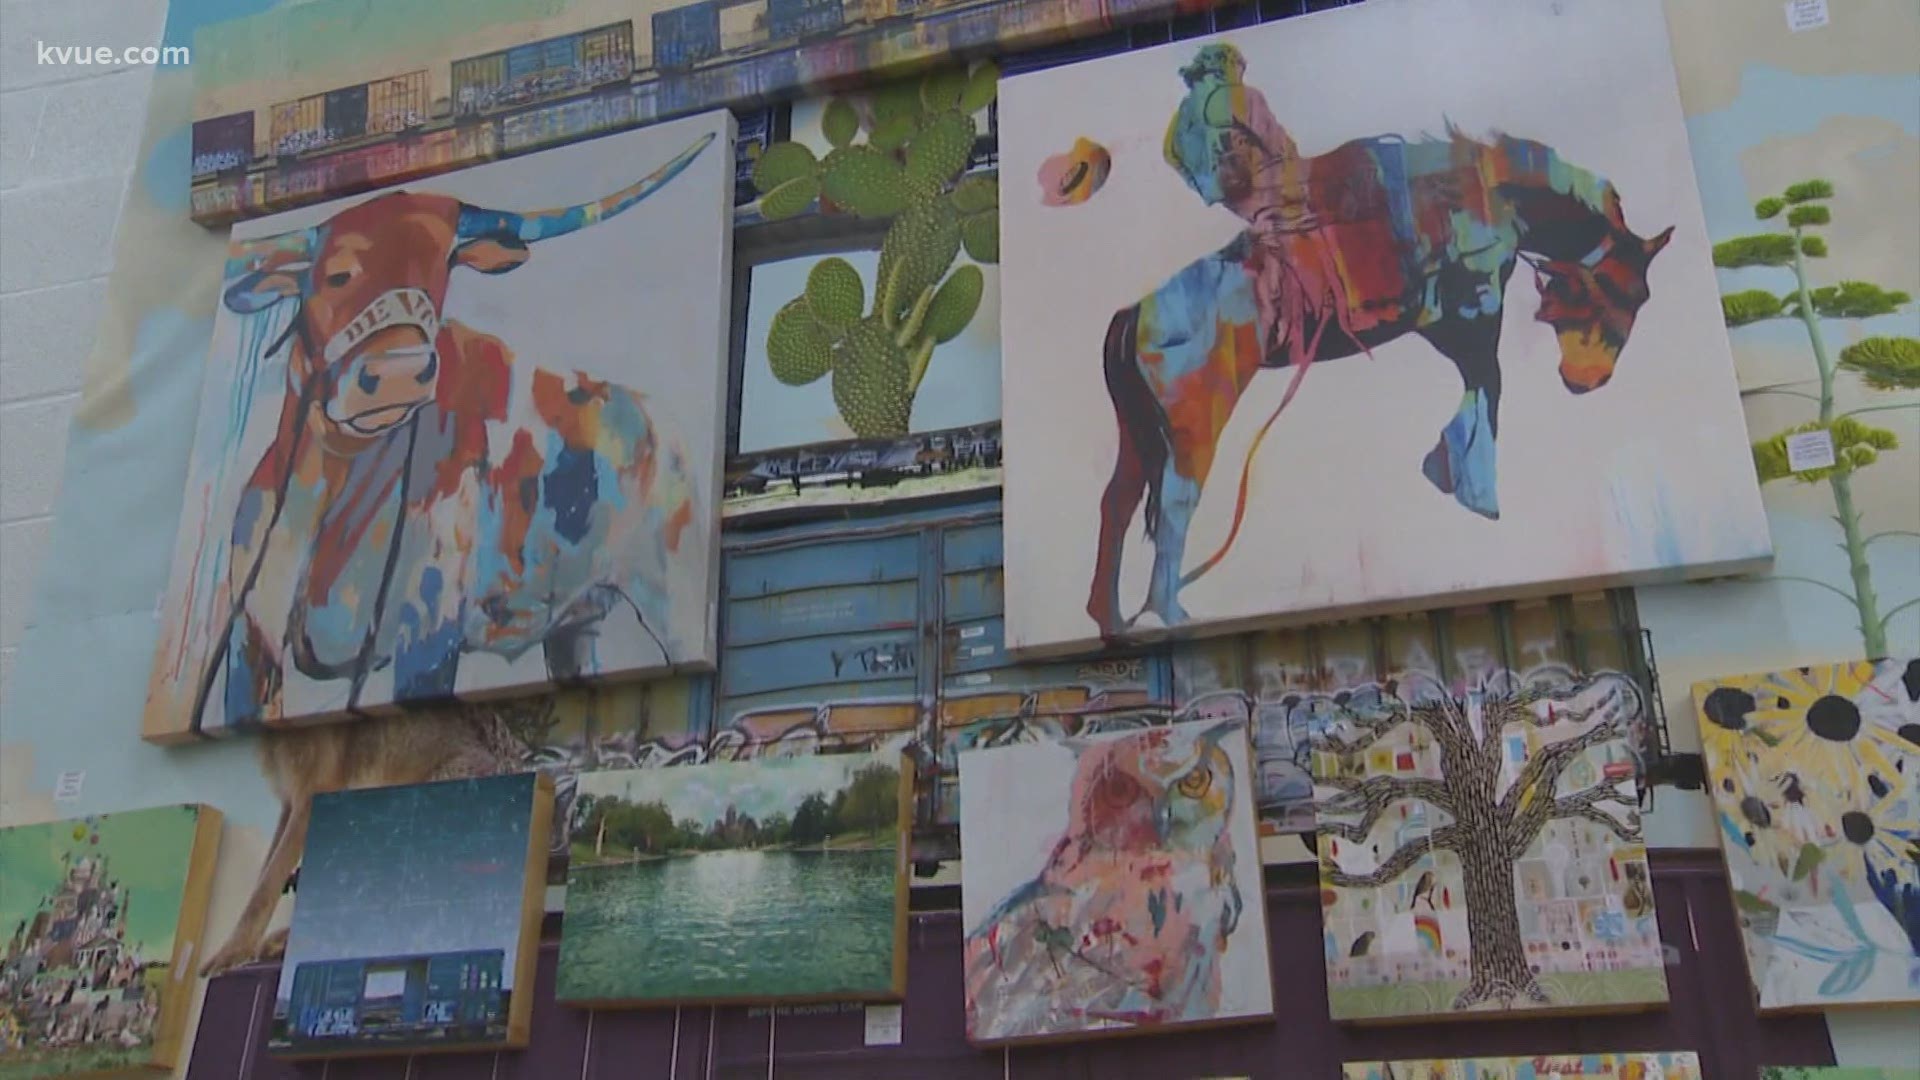 KVUE's "Keep Austin Local" series continues. This time, Brittany Flowers stopped by the Blue Genie Art Bazaar.